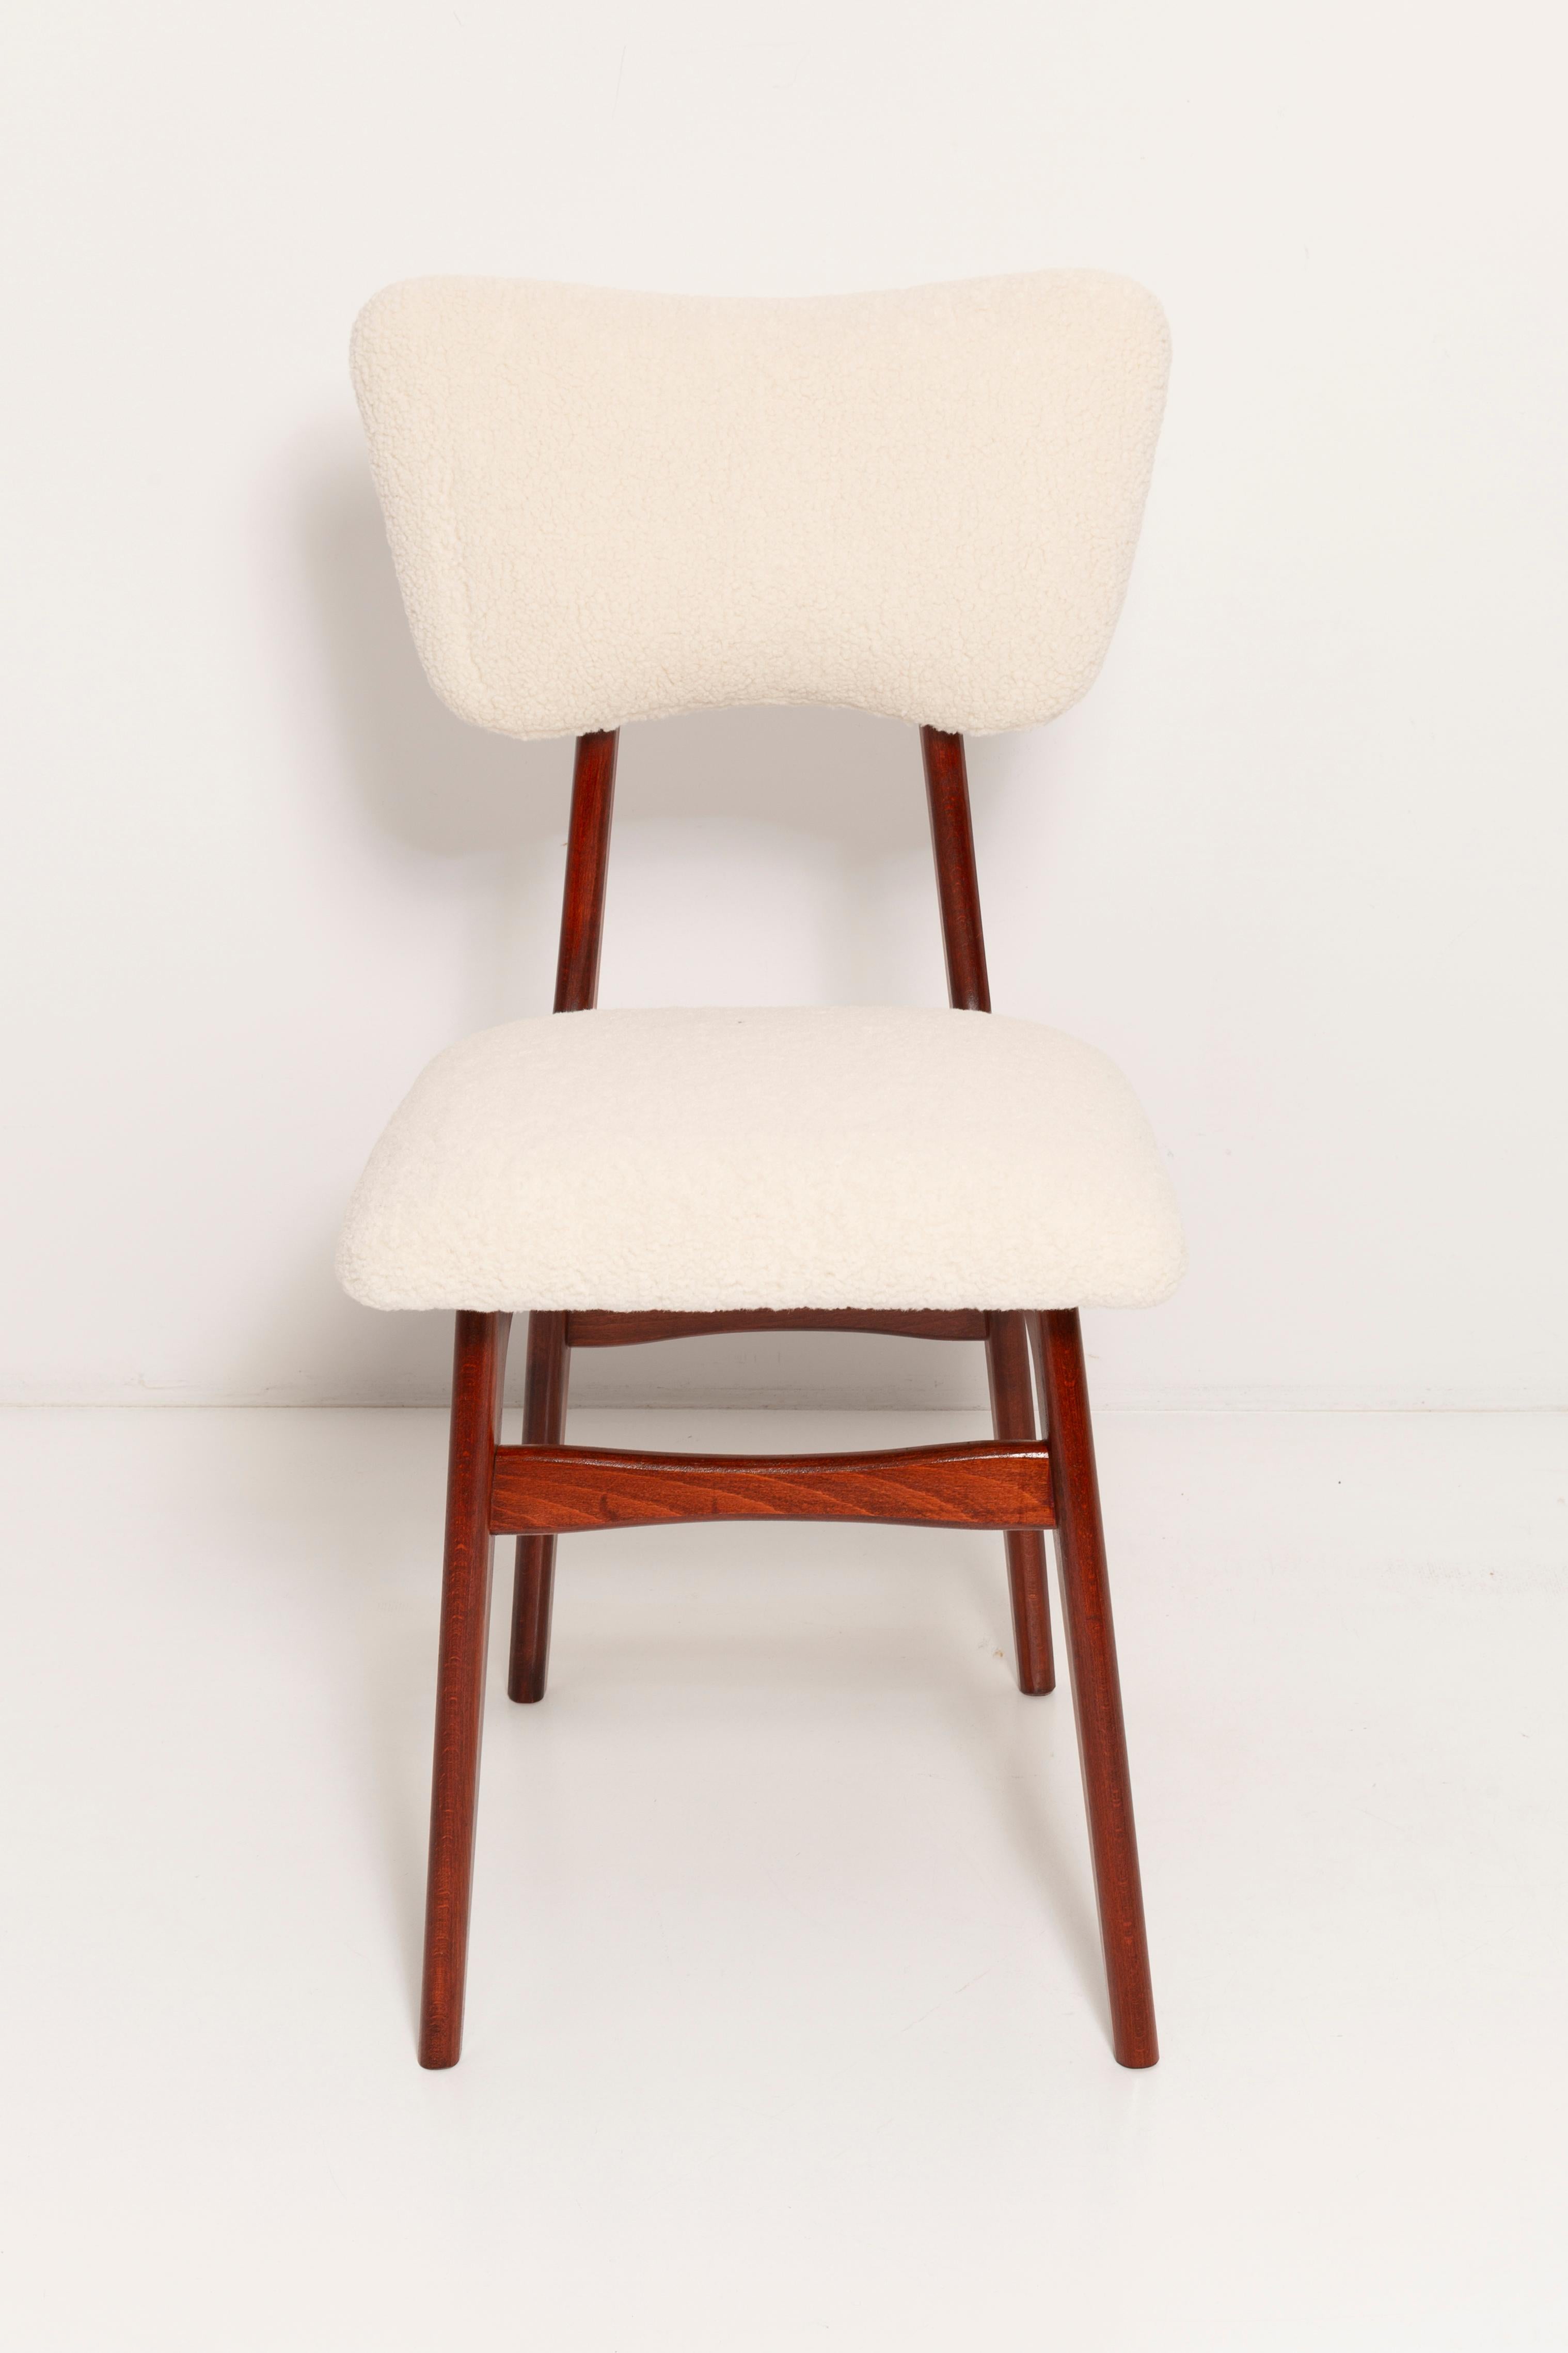 20th Century Light Crème Boucle Cherry Wood Chair, Europe, 1960 For Sale 7